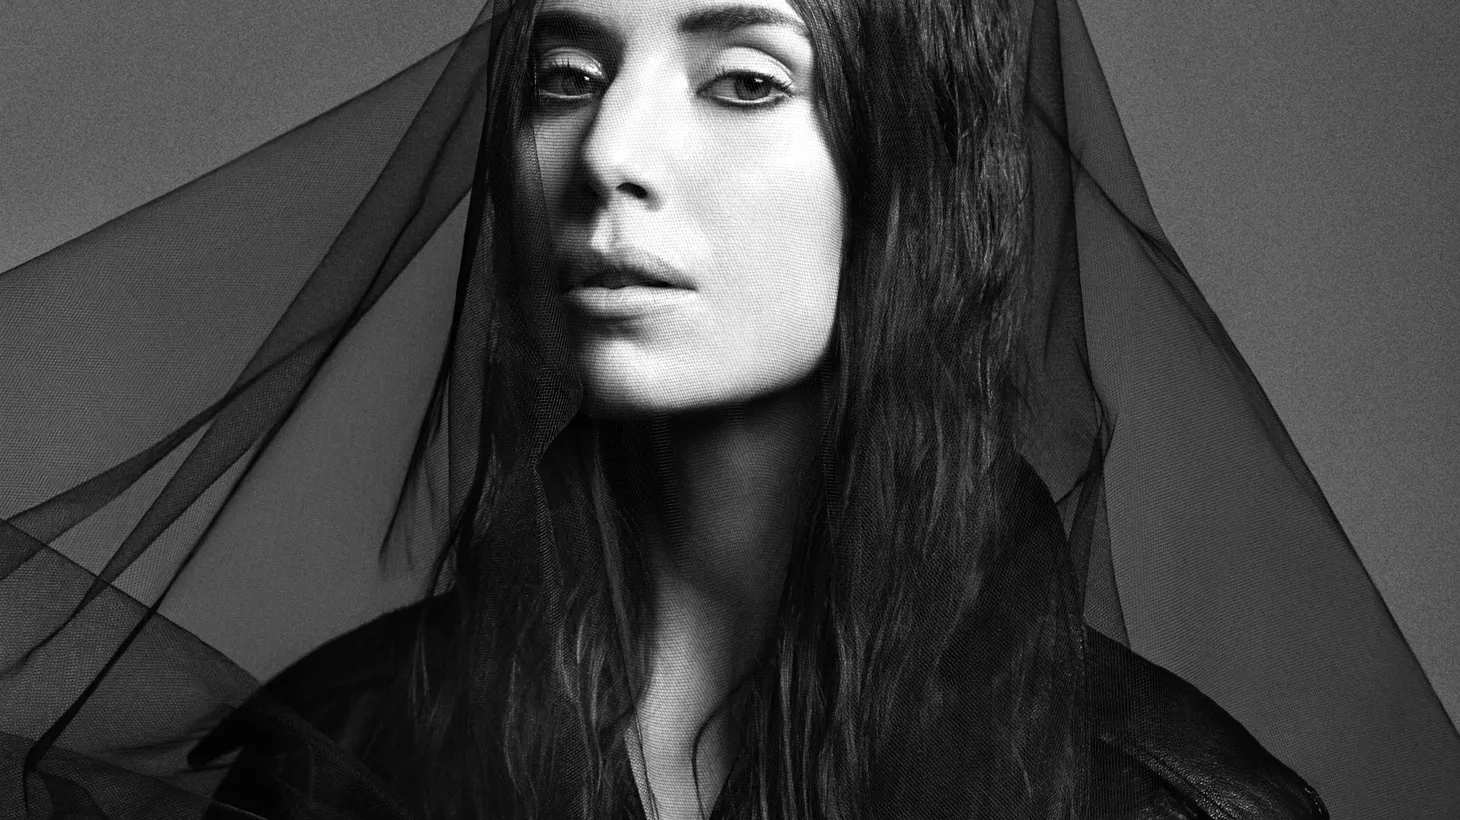 Swedish singer Lykke Li lets her heartache be her guide on her latest release. She doesn't shy away from sadness.